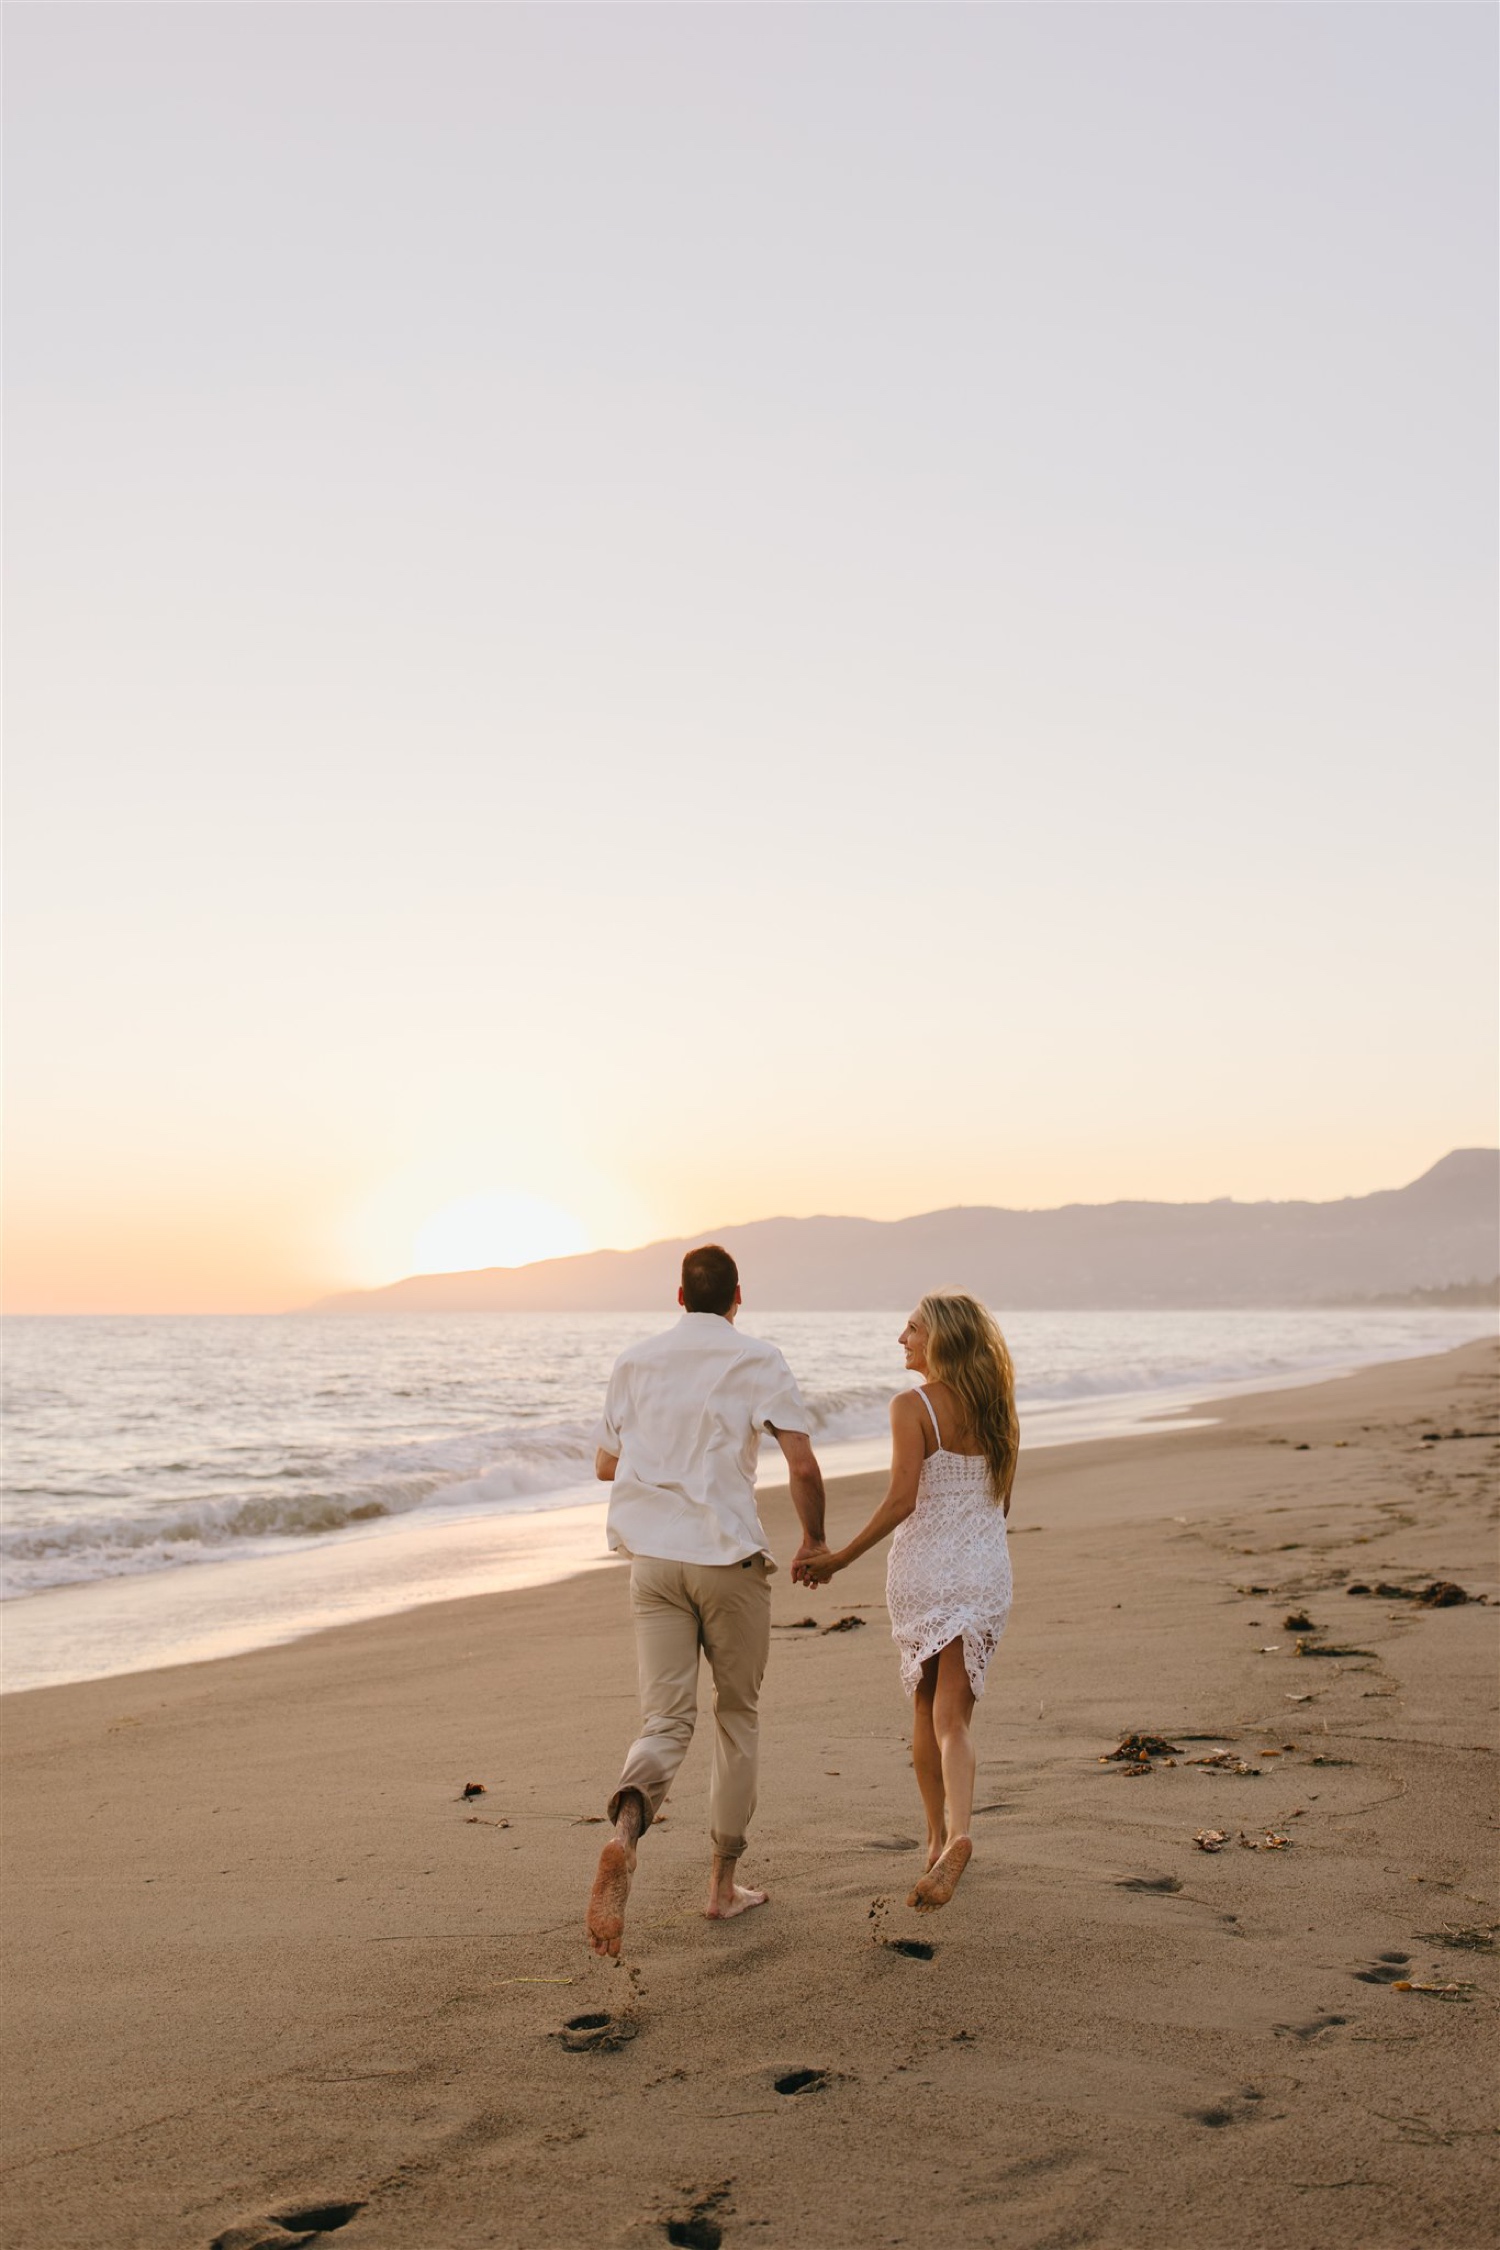 socal sunset beach engagement session photographed by Hanna Walkowaik